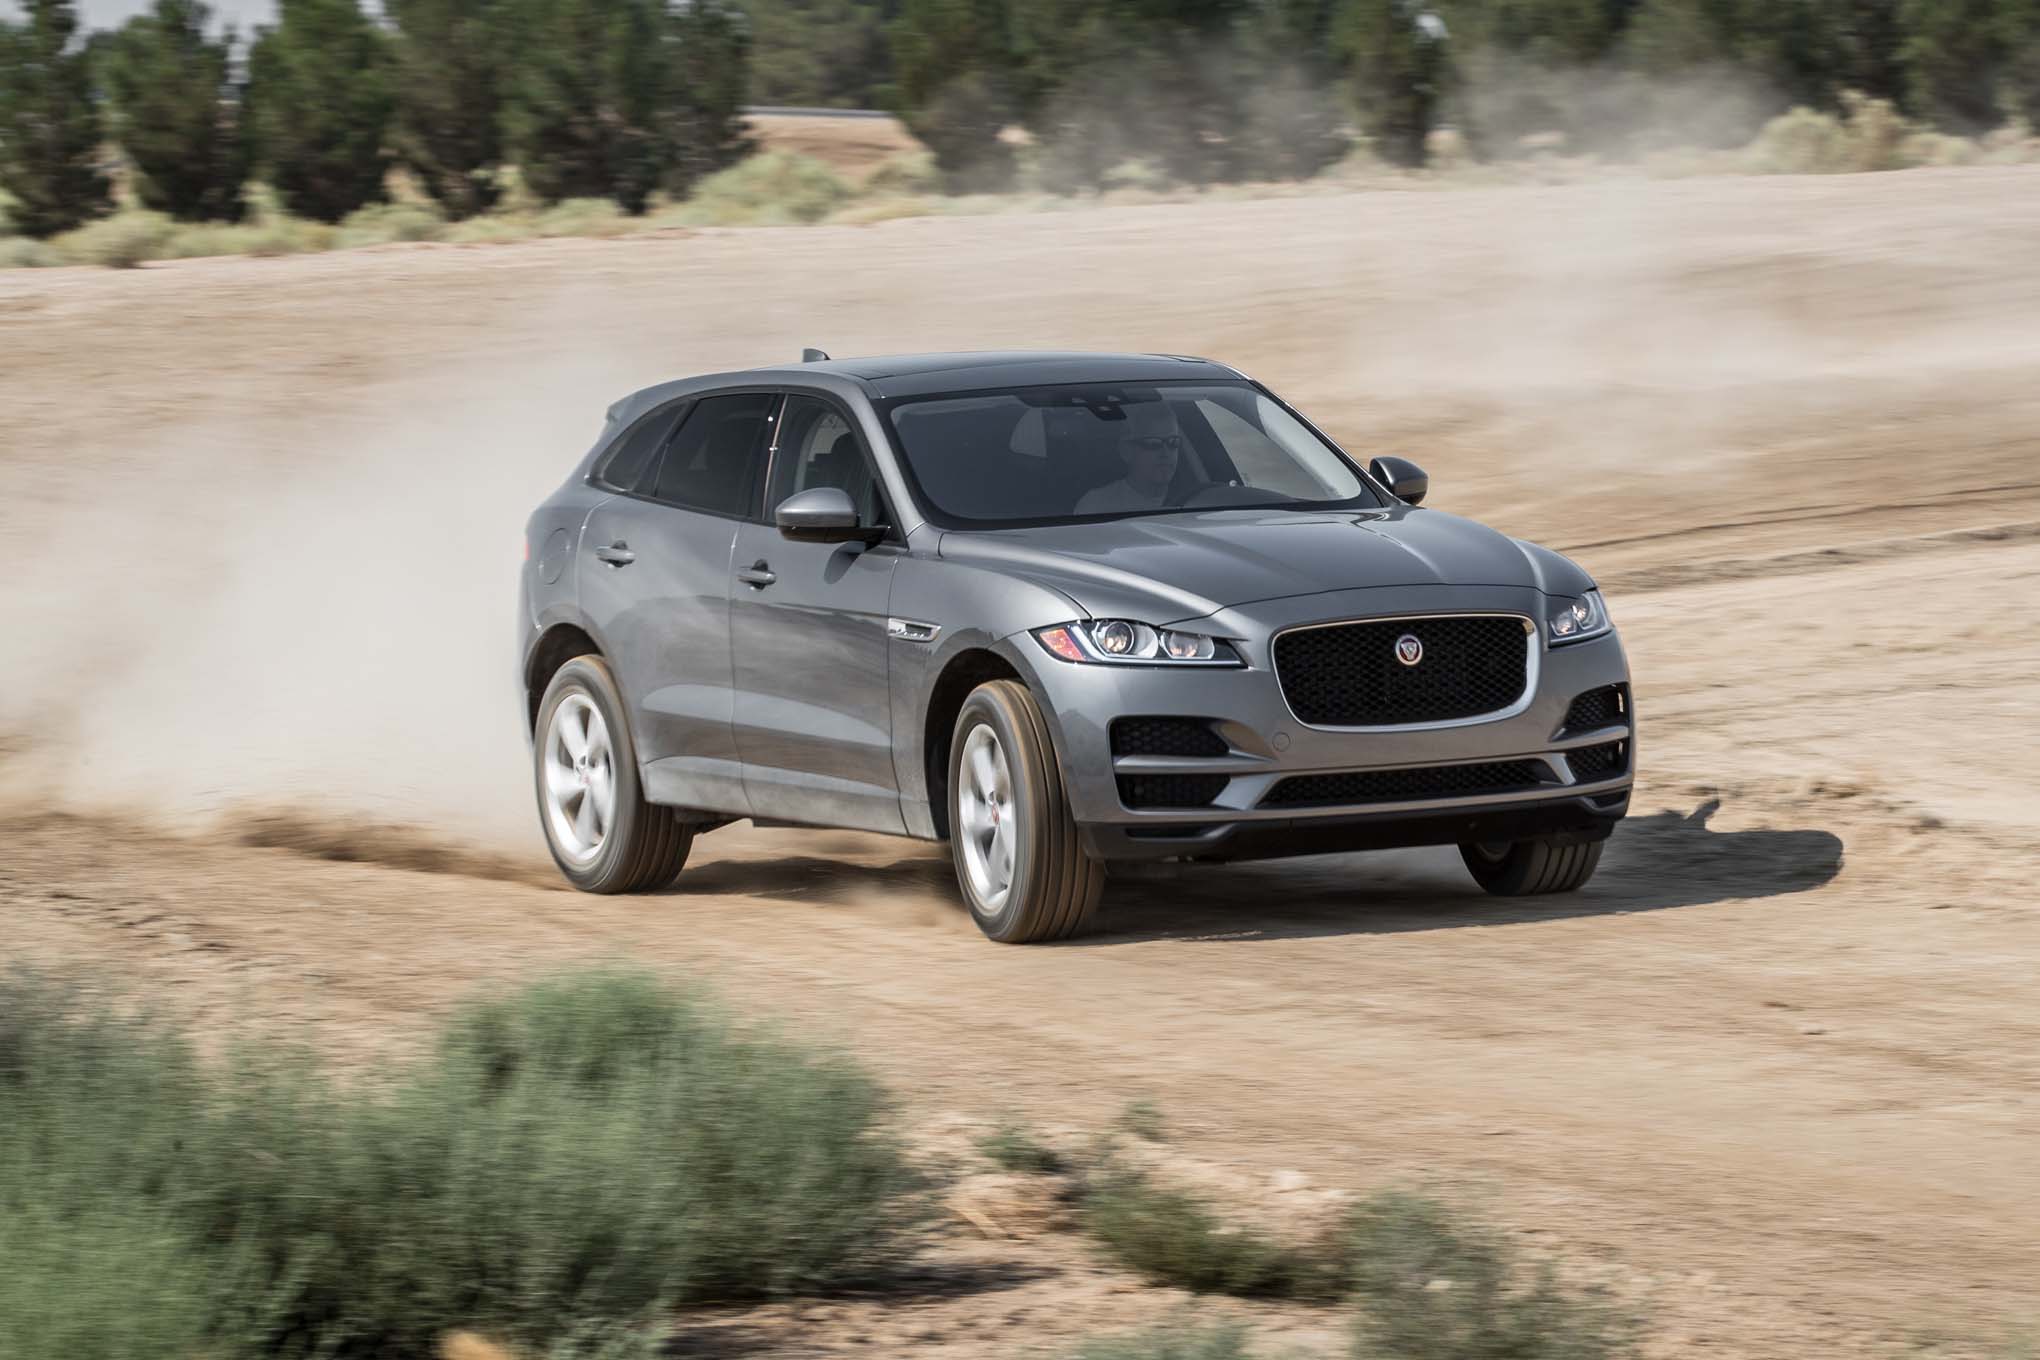 2017-jaguar-f-pace-35t-awd-front-three-quarter-in-motion-02-1